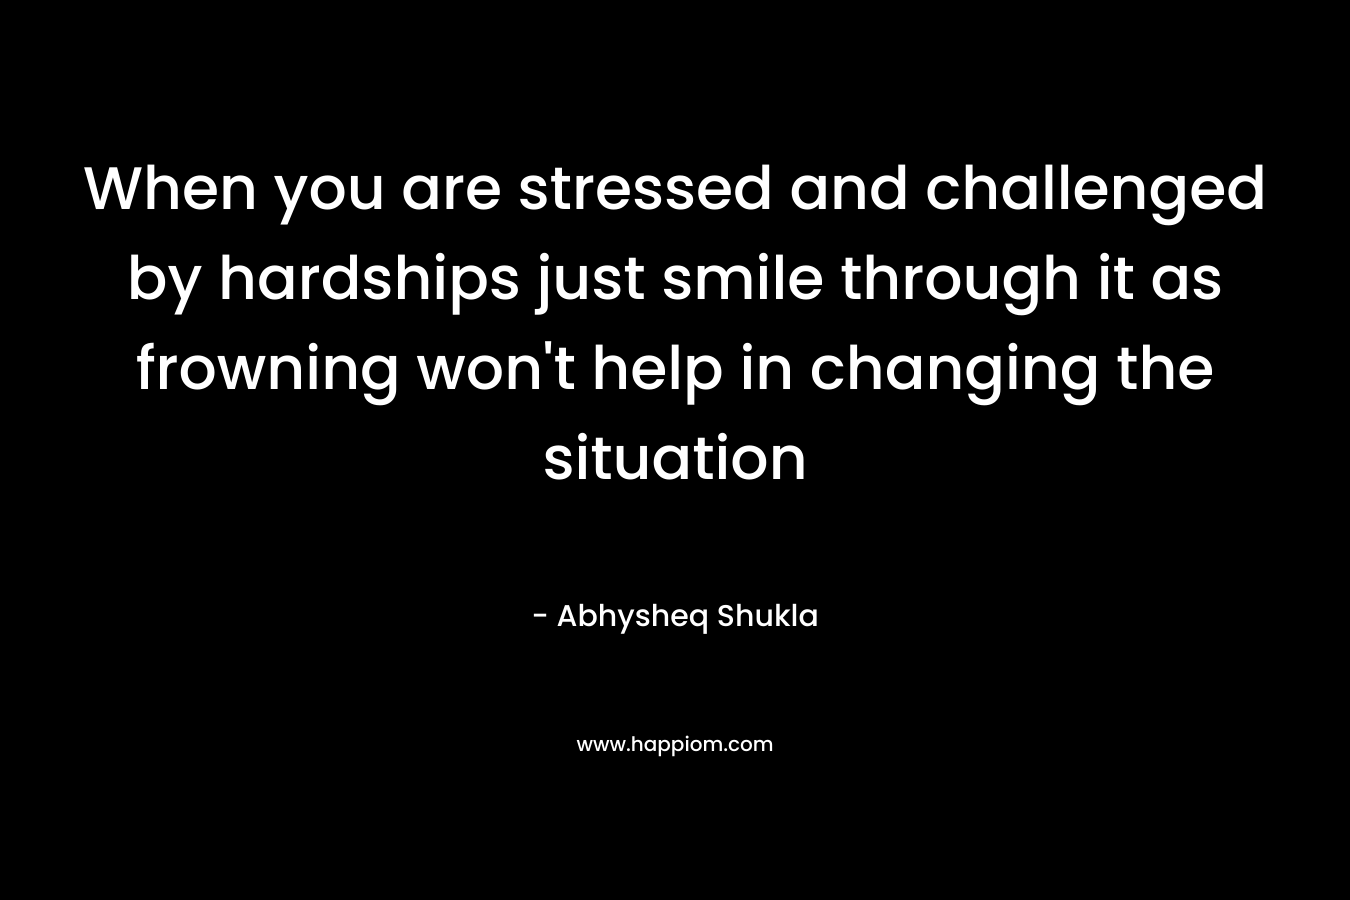 When you are stressed and challenged by hardships just smile through it as frowning won’t help in changing the situation – Abhysheq Shukla